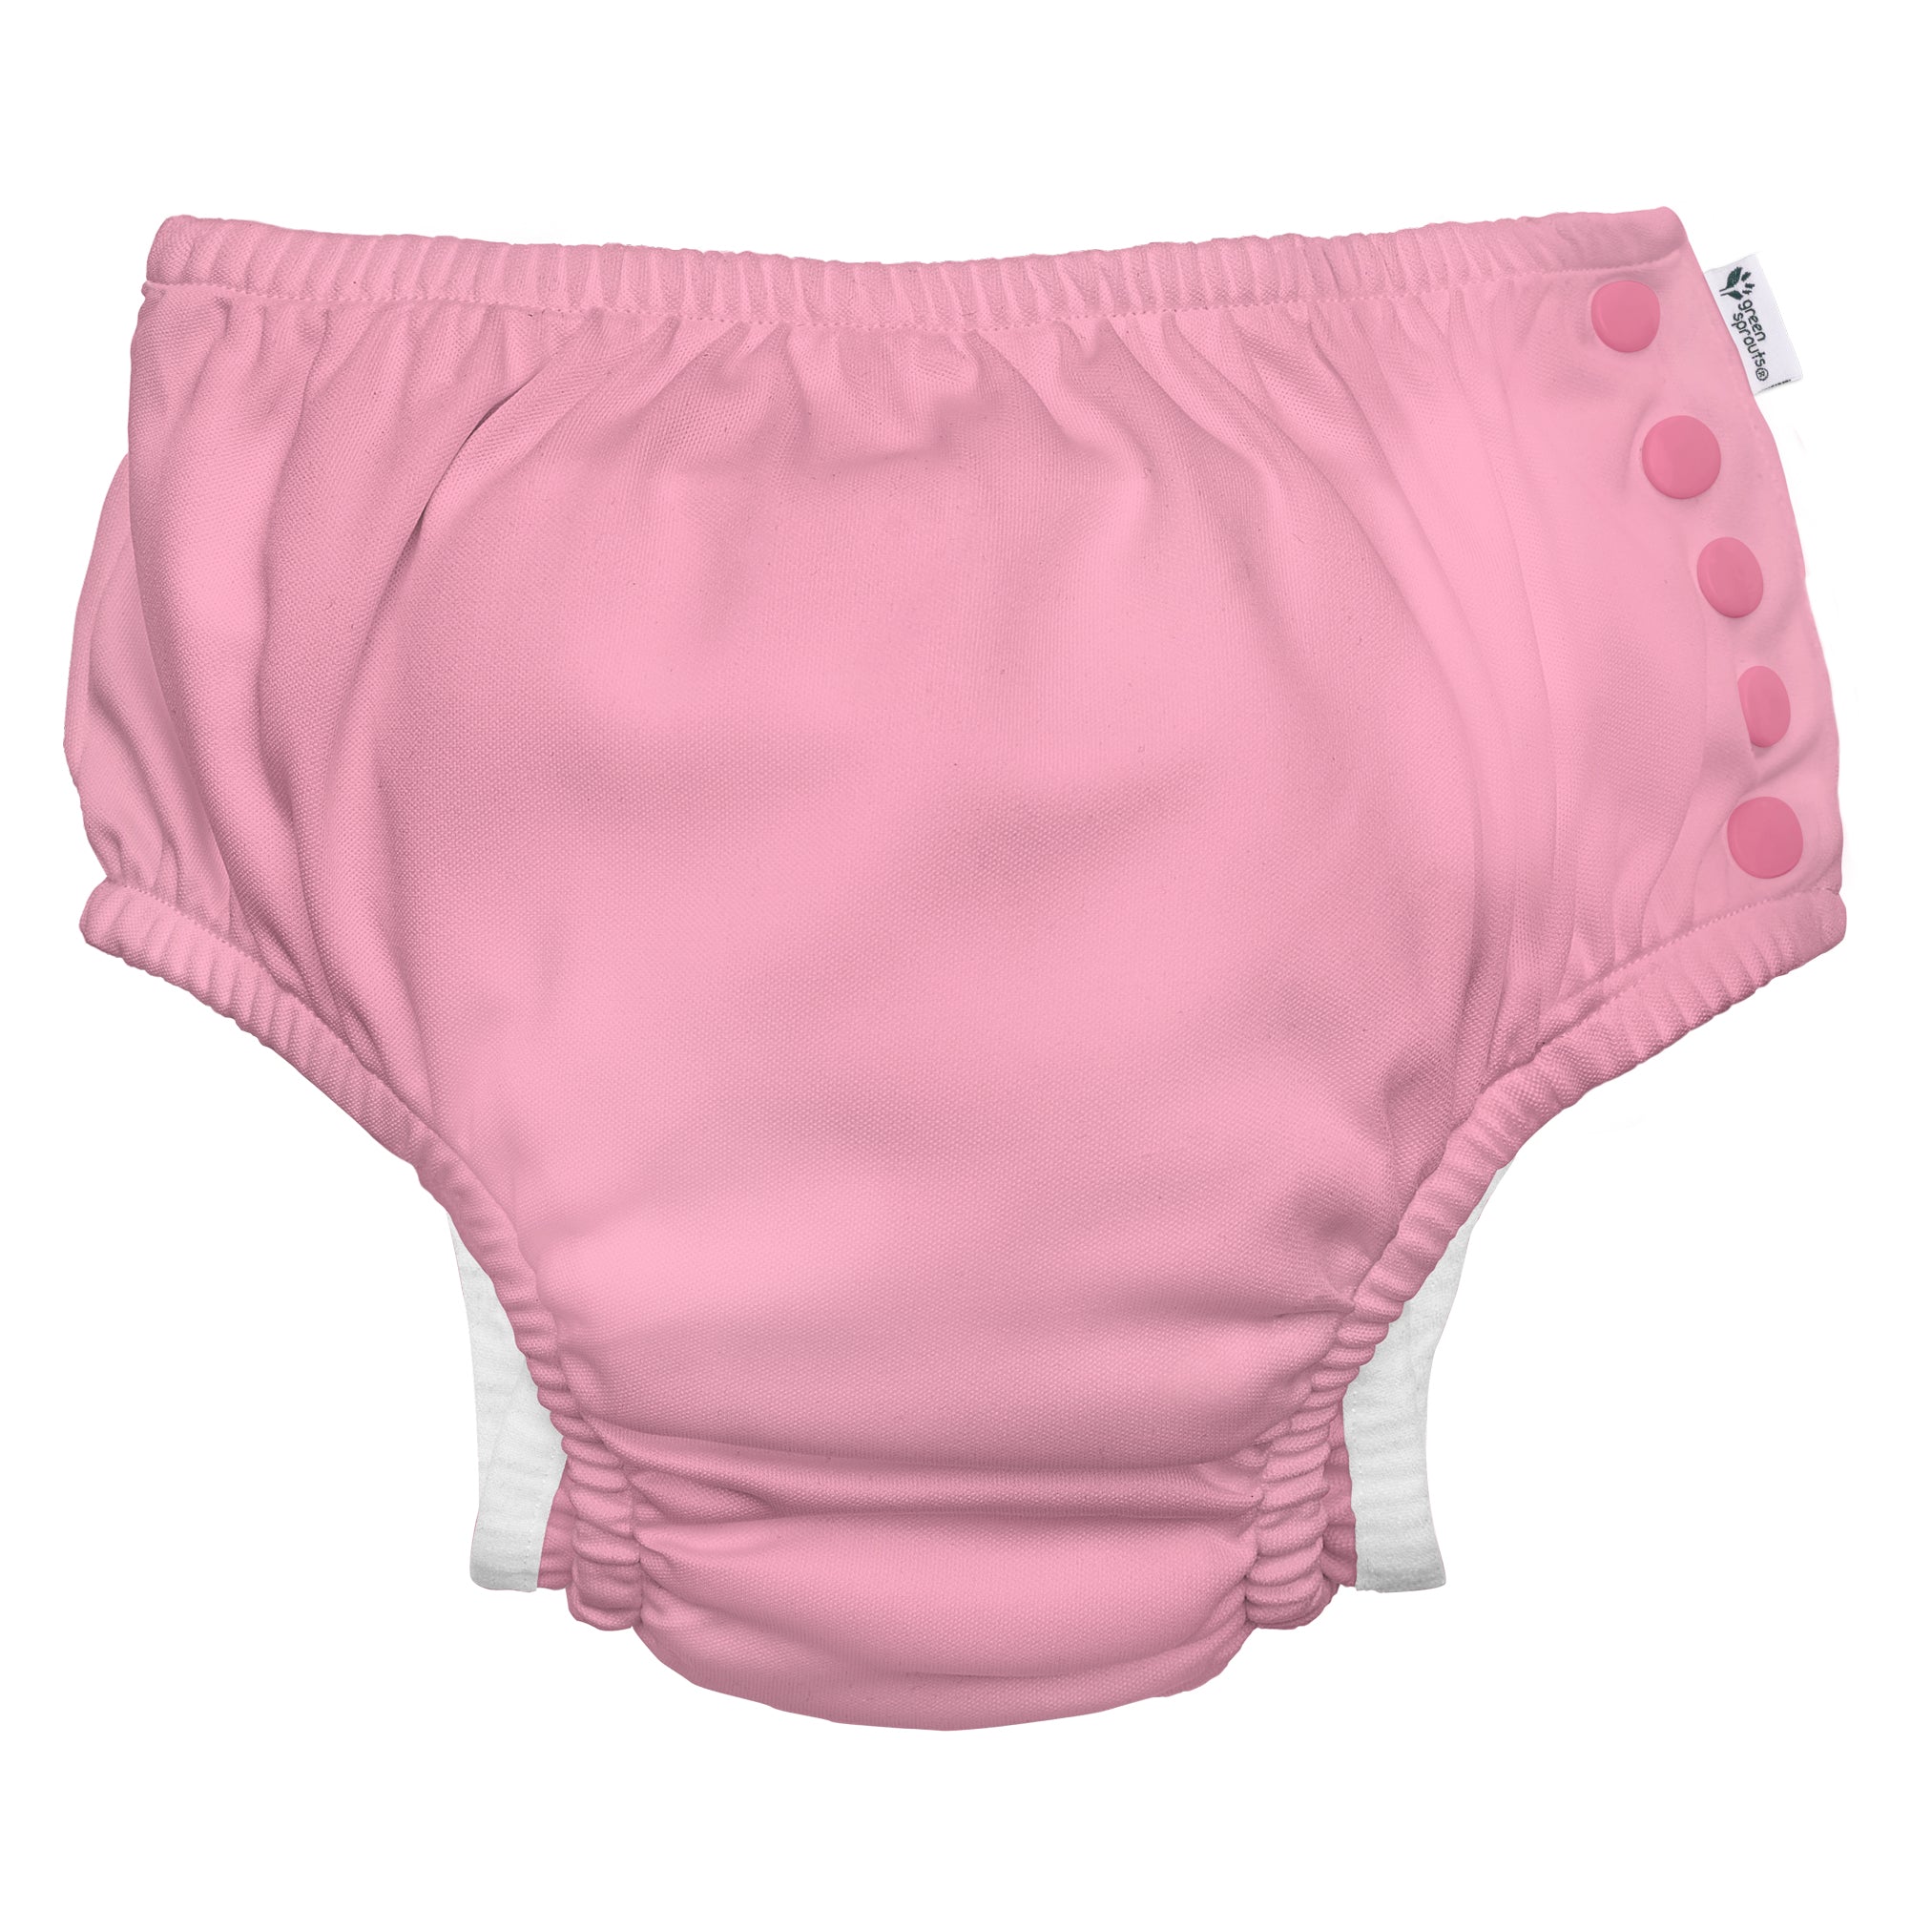 Experience stress-free, mess-free swimming with the Eco Snap Swim Diaper! This reusable diaper boasts UPF 50+ sun protection, leak-proof design, and easy on/off convenience. Made with recycled materials and Oeko-Tex certified for safety, it's perfect for eco-conscious parents and active little ones. Available in adorable solid colors, choose the perfect one for your child! Give your child a happy & safe swim experience - order yours today!